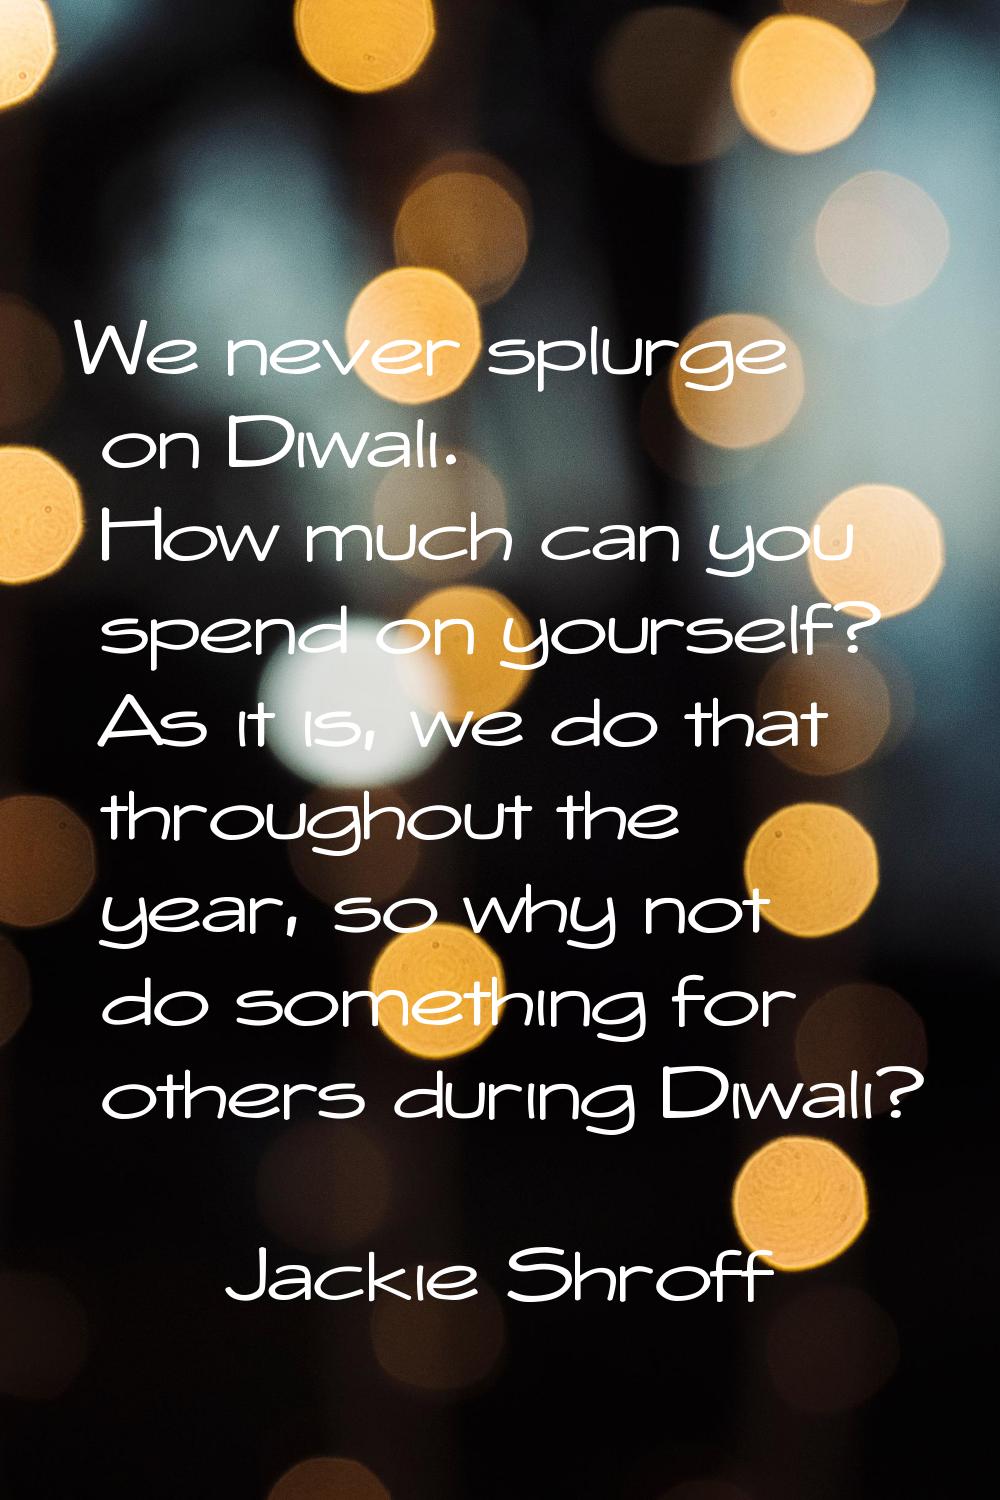 We never splurge on Diwali. How much can you spend on yourself? As it is, we do that throughout the